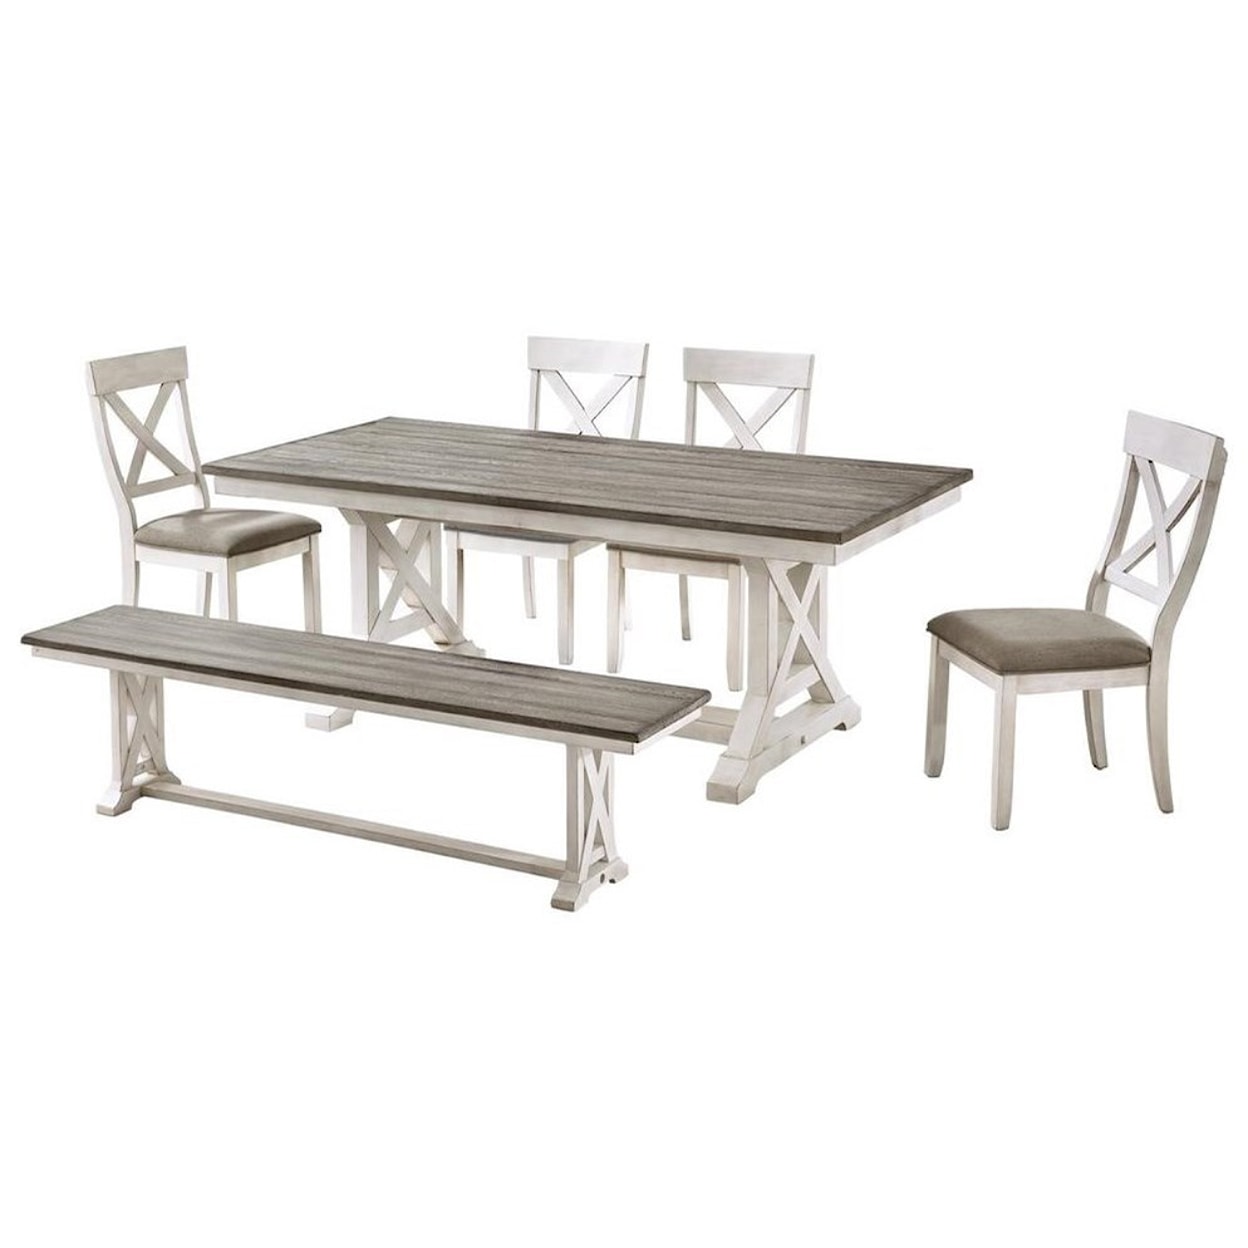 Carolina Accent Bar Harbor II 6-Piece Table and Chair Set with Bench